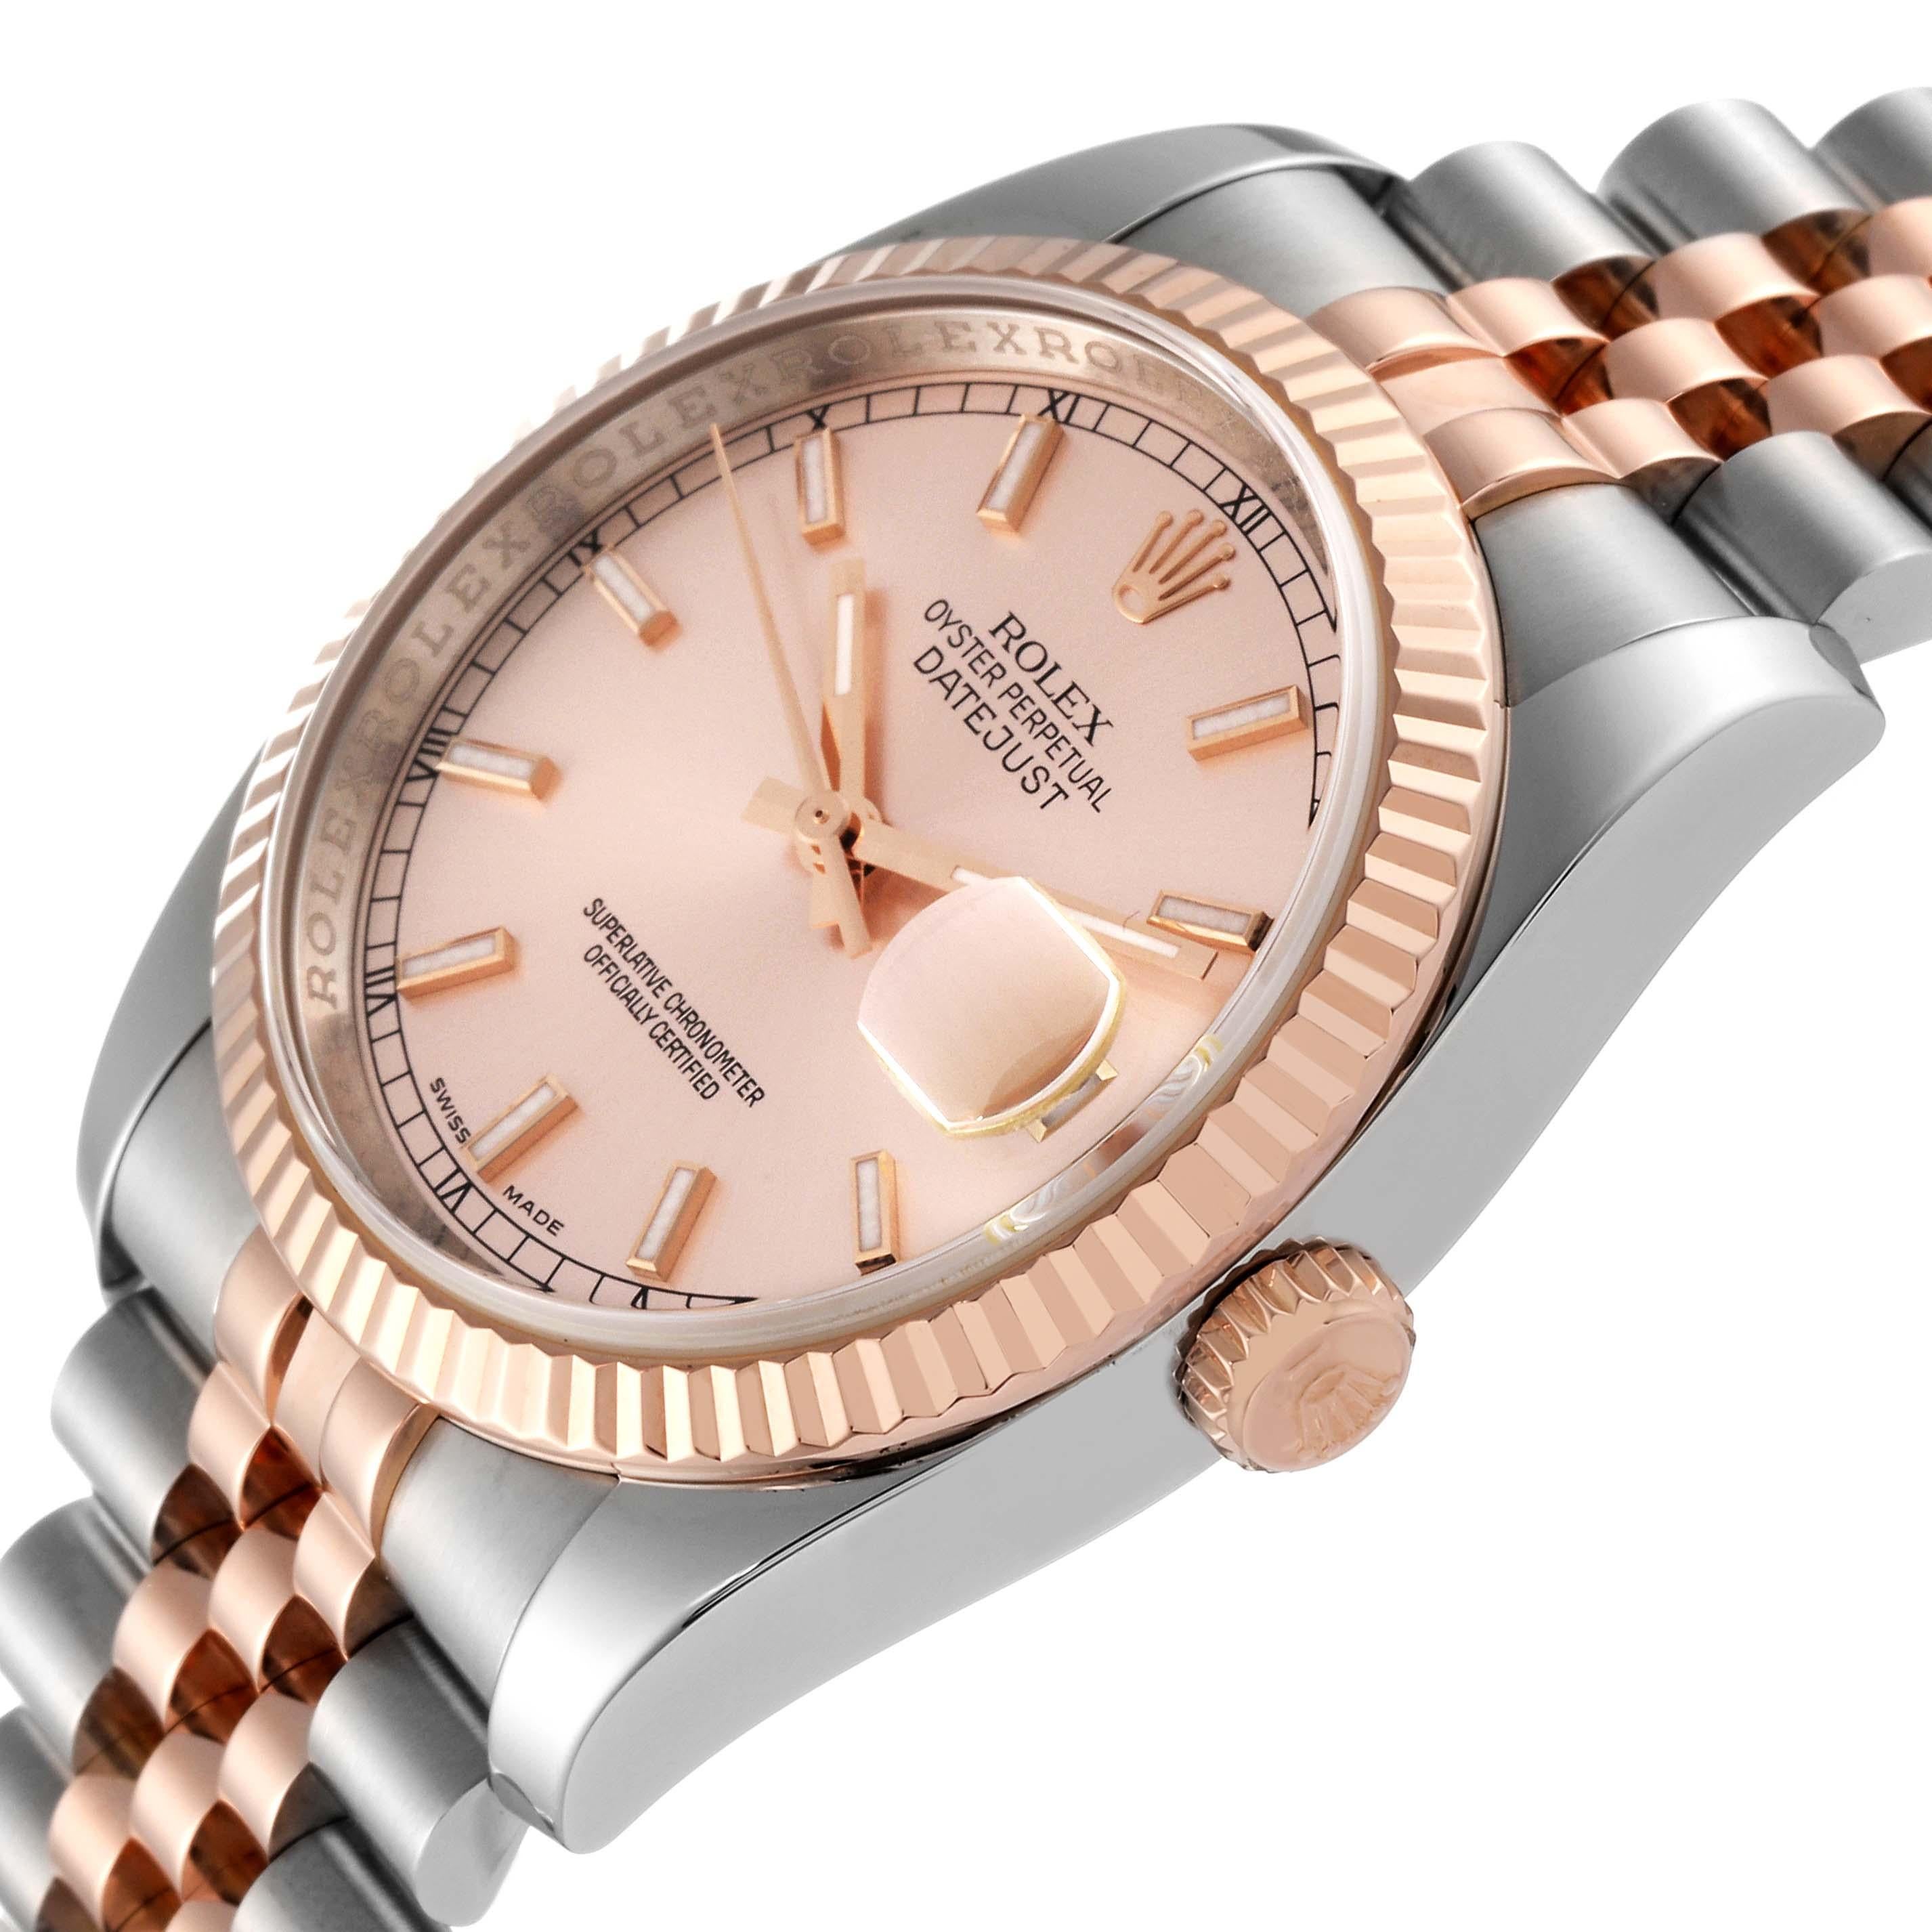 Rolex Datejust Steel Rose Gold Pink Dial Mens Watch 116231 Box Papers en vente 6